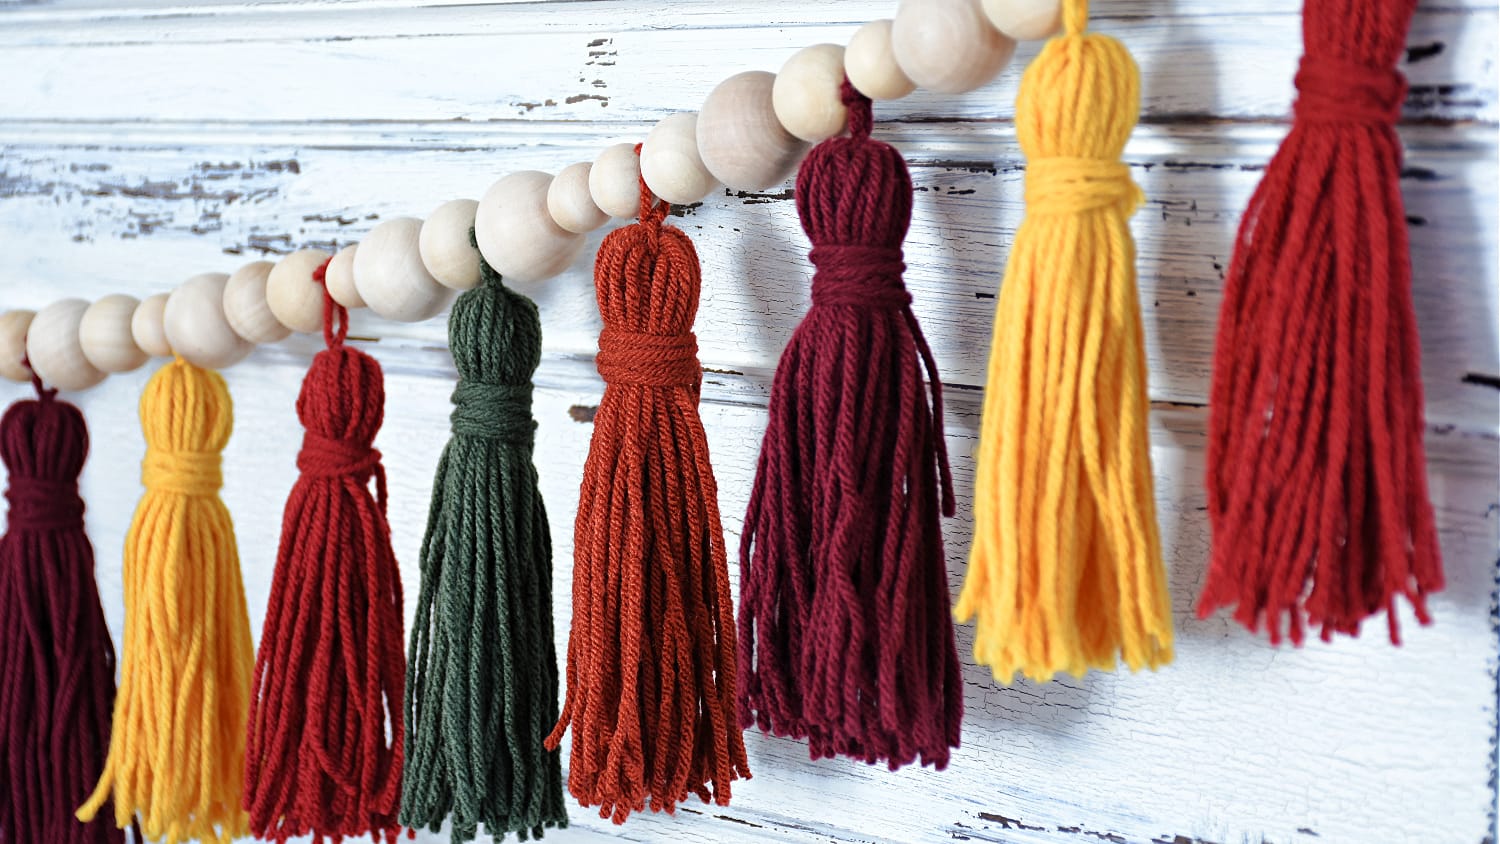 DIY Craft Tutorial - How to make tassels to add to your knits